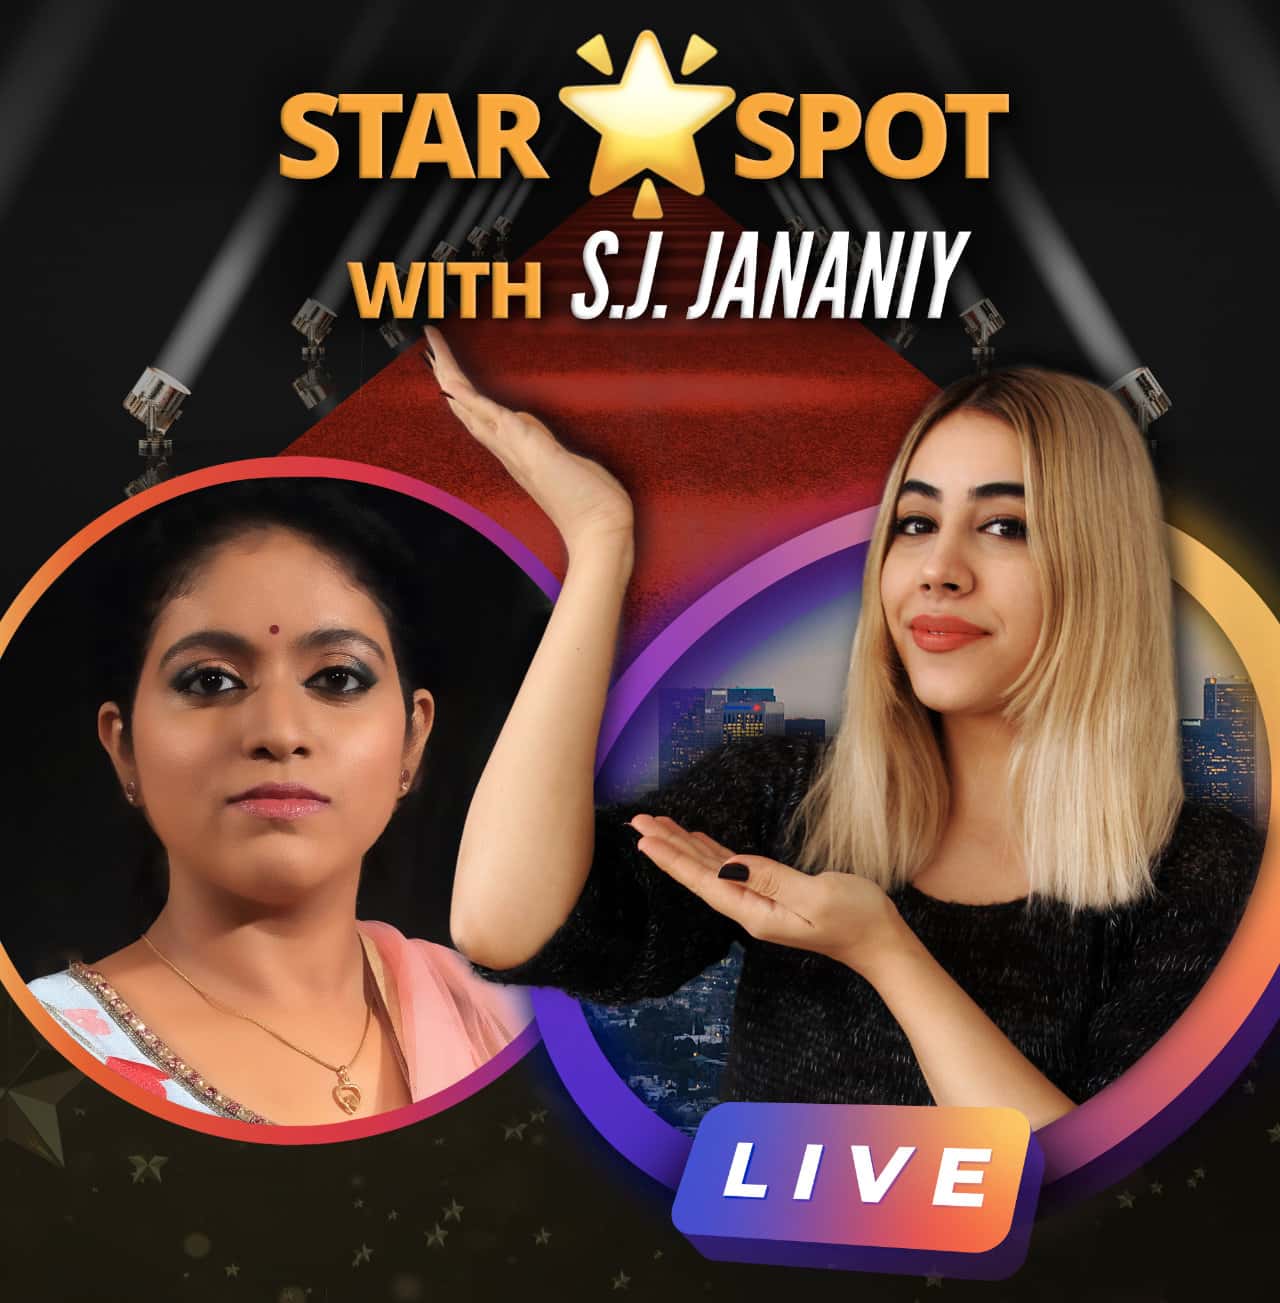 Promotional cover art of Star Spot with S. J. Jananiy